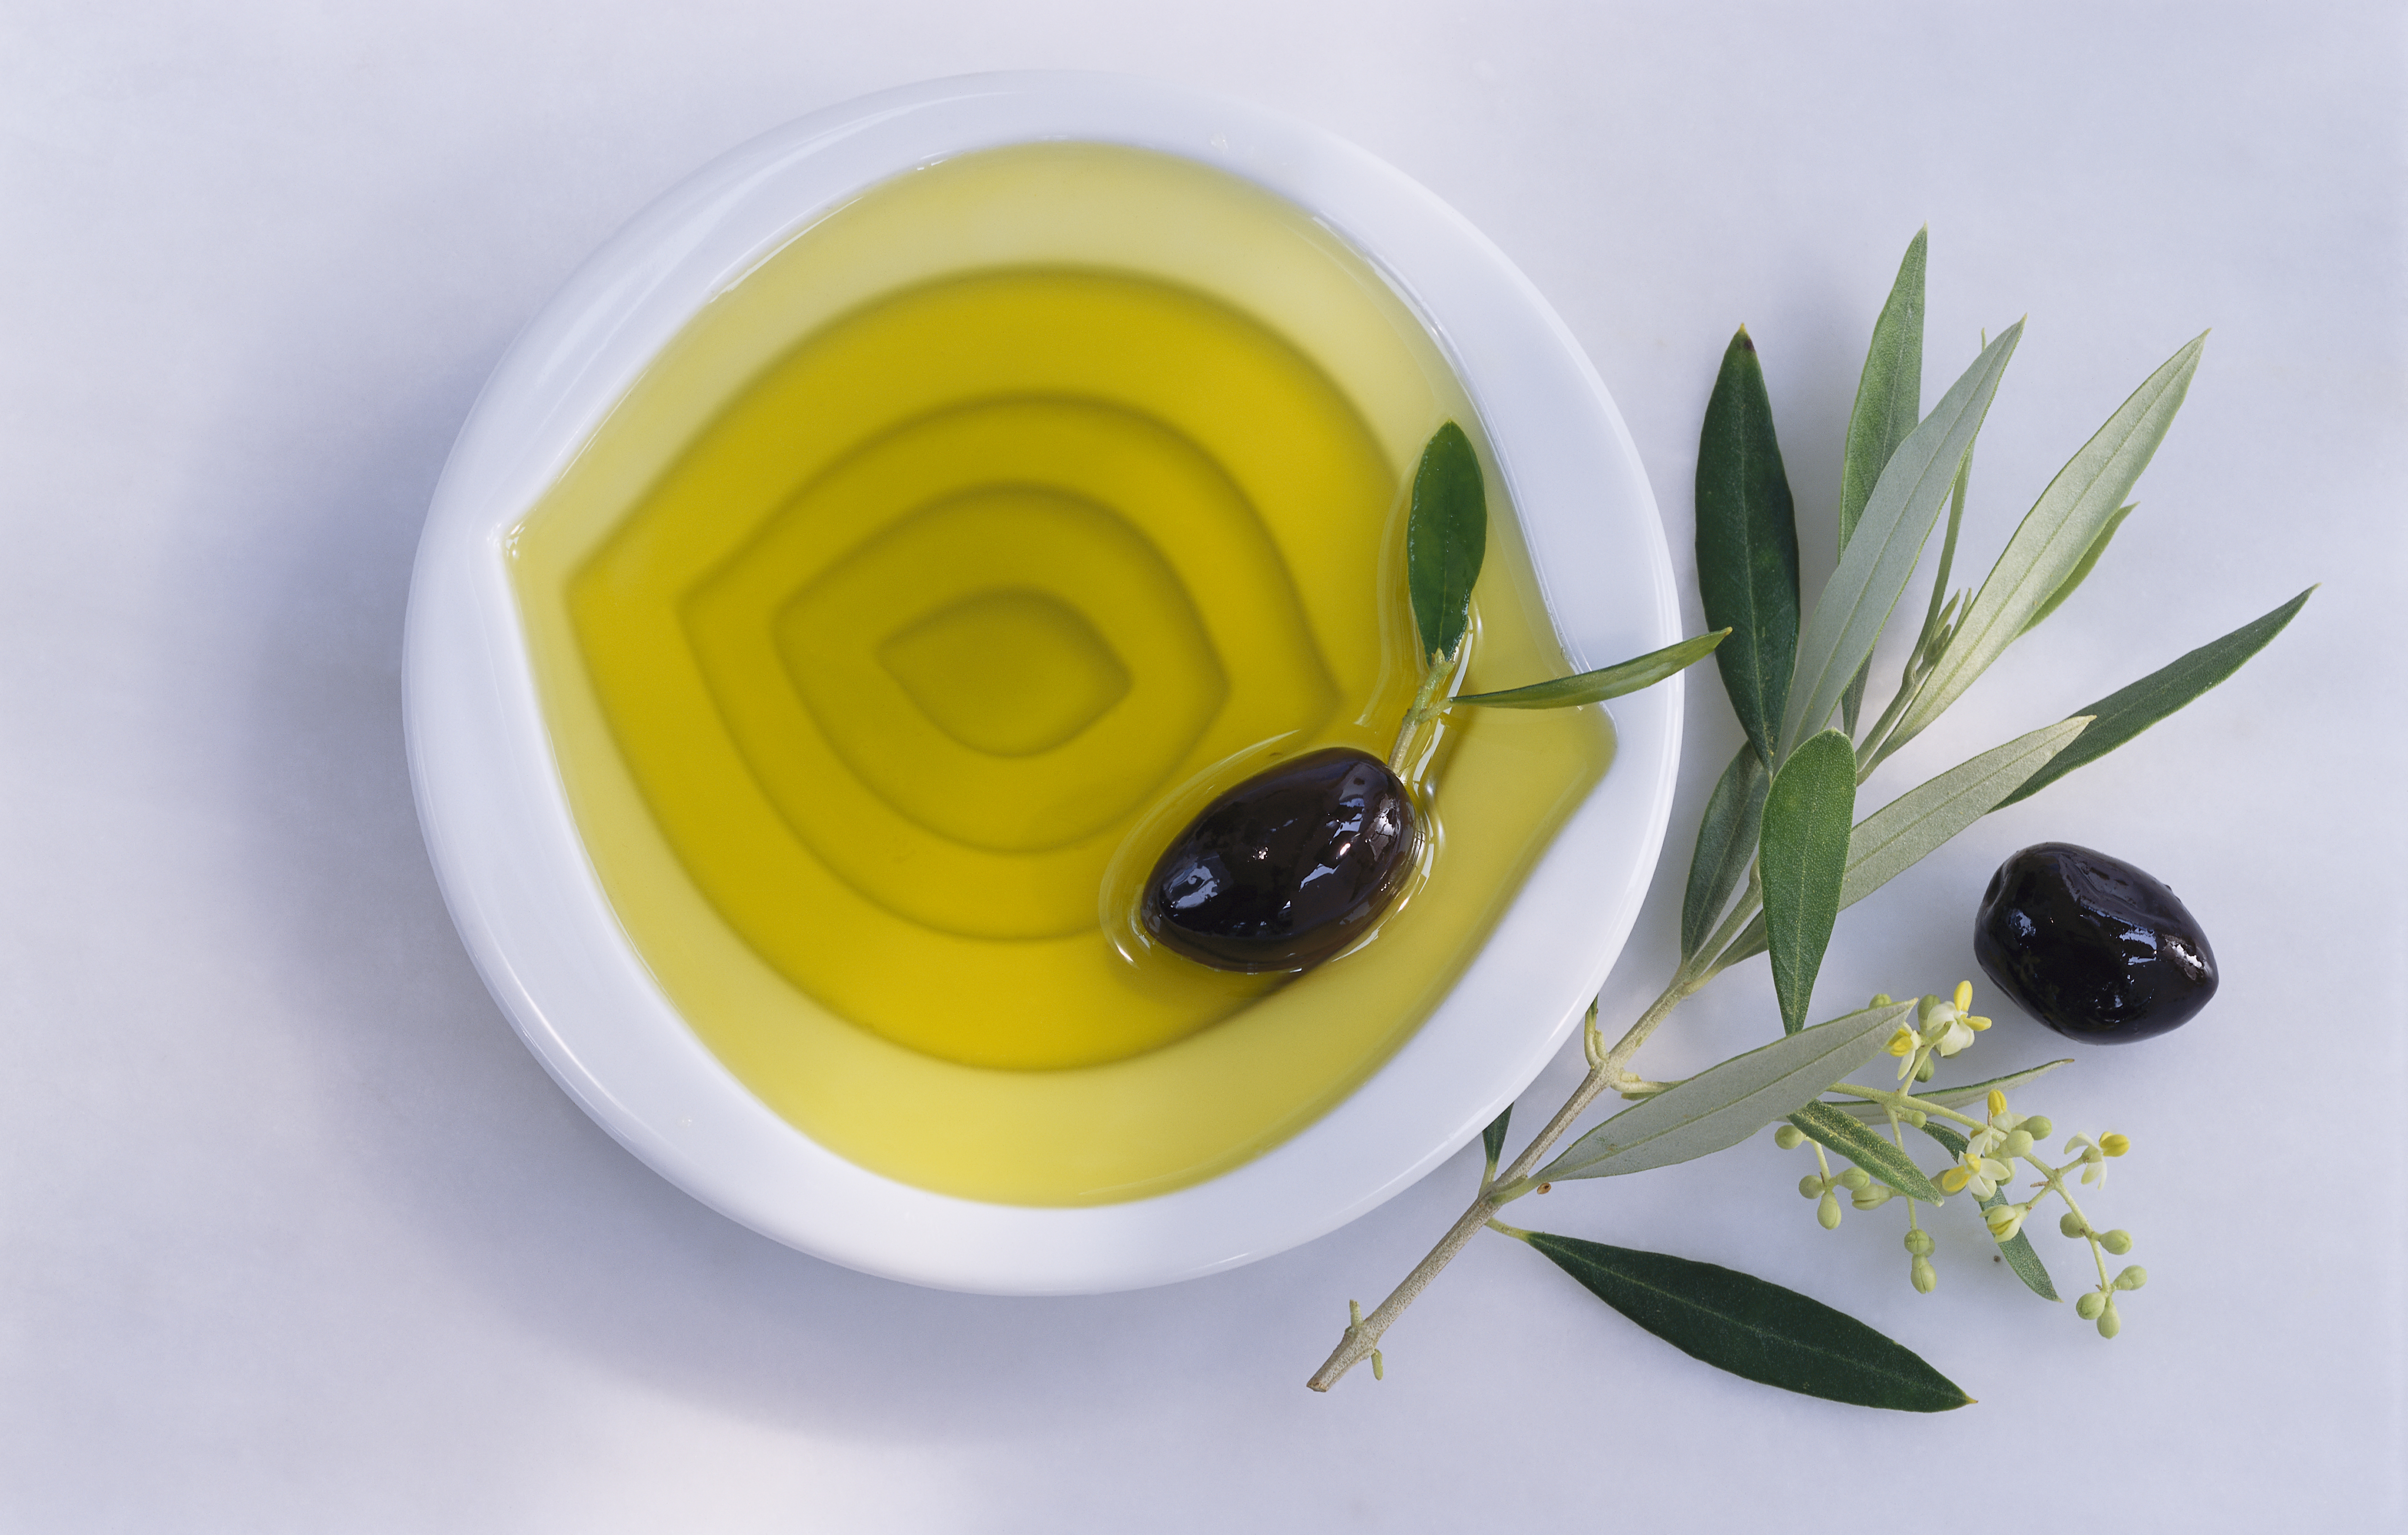 Olives 101: Nutrition Facts and Health Benefits